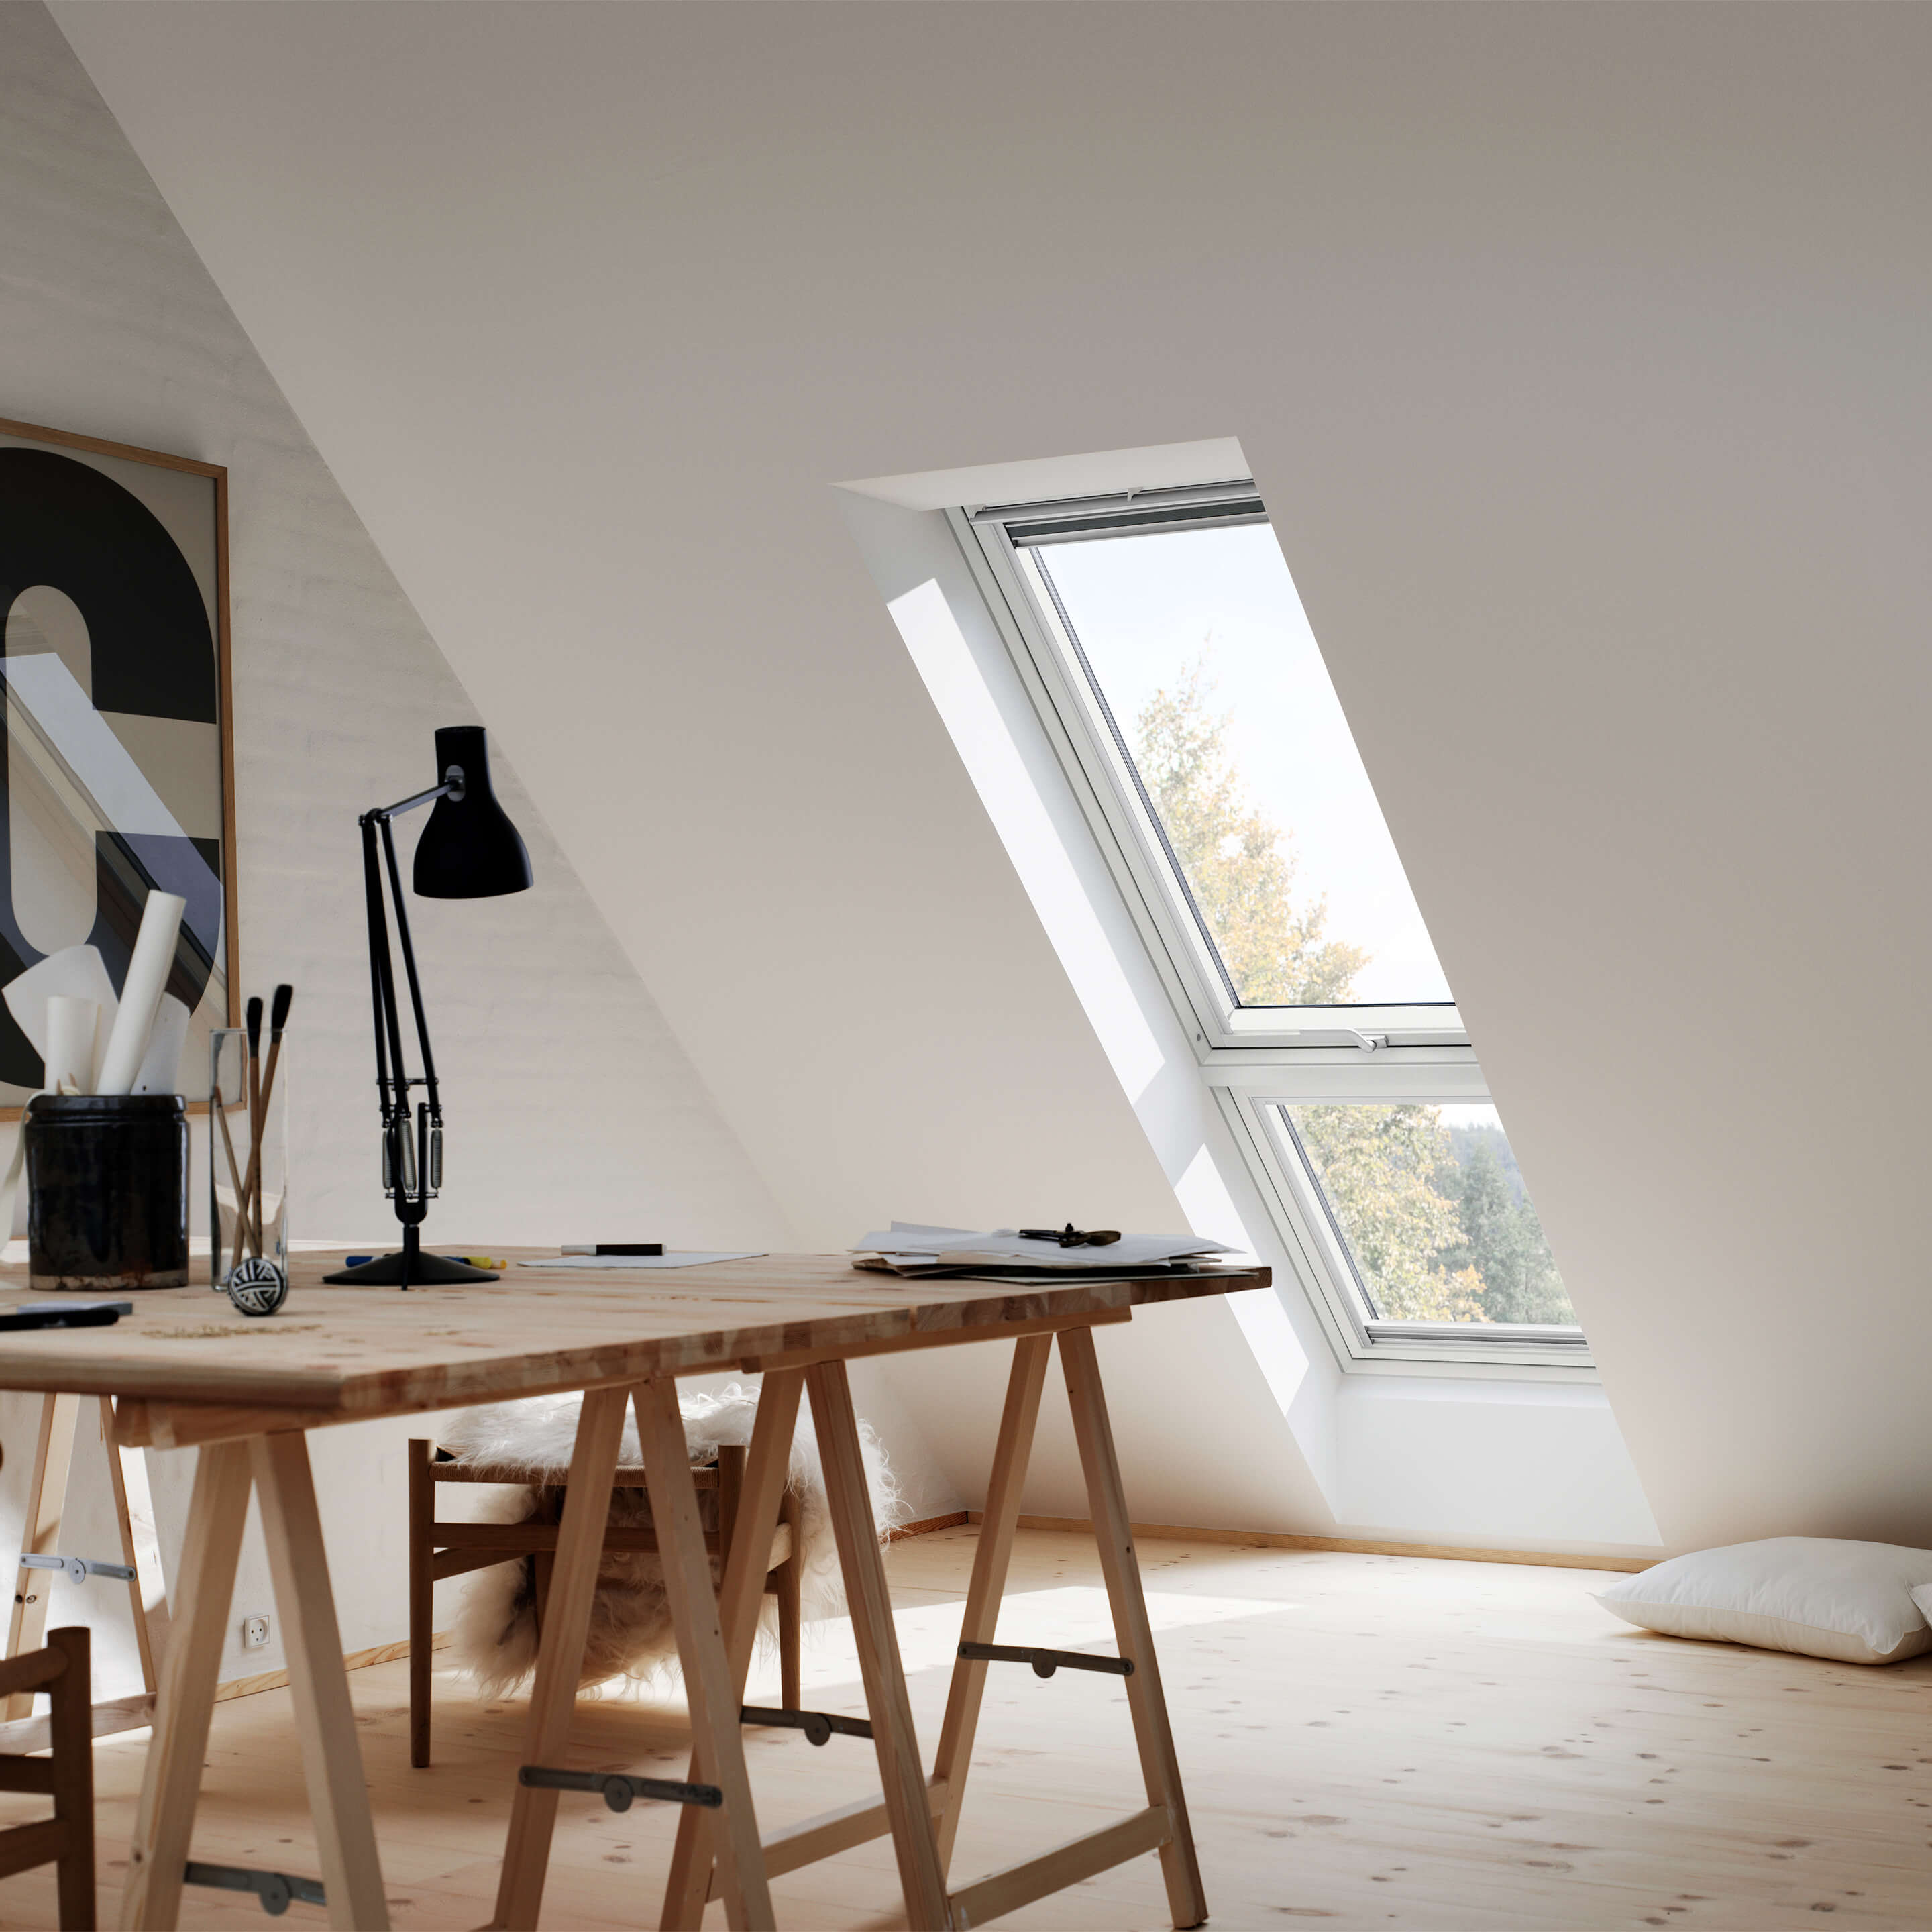 VELUX duo multiple roof window solution interior view in home office